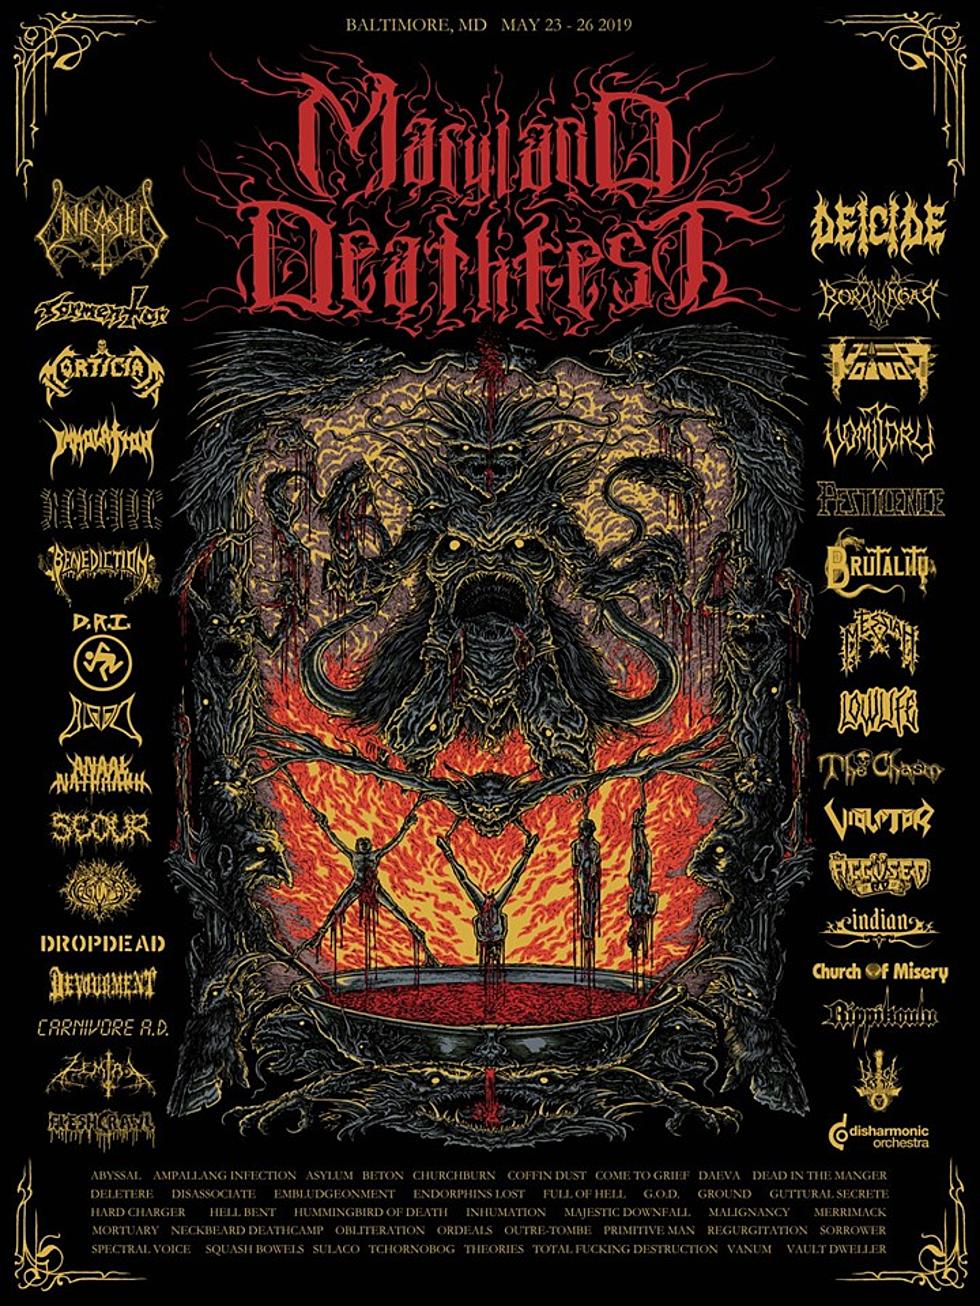 Maryland Deathfest 2019: final lineup &#038; schedule (Cro-Mags &#8220;JM&#8221; dropped off)